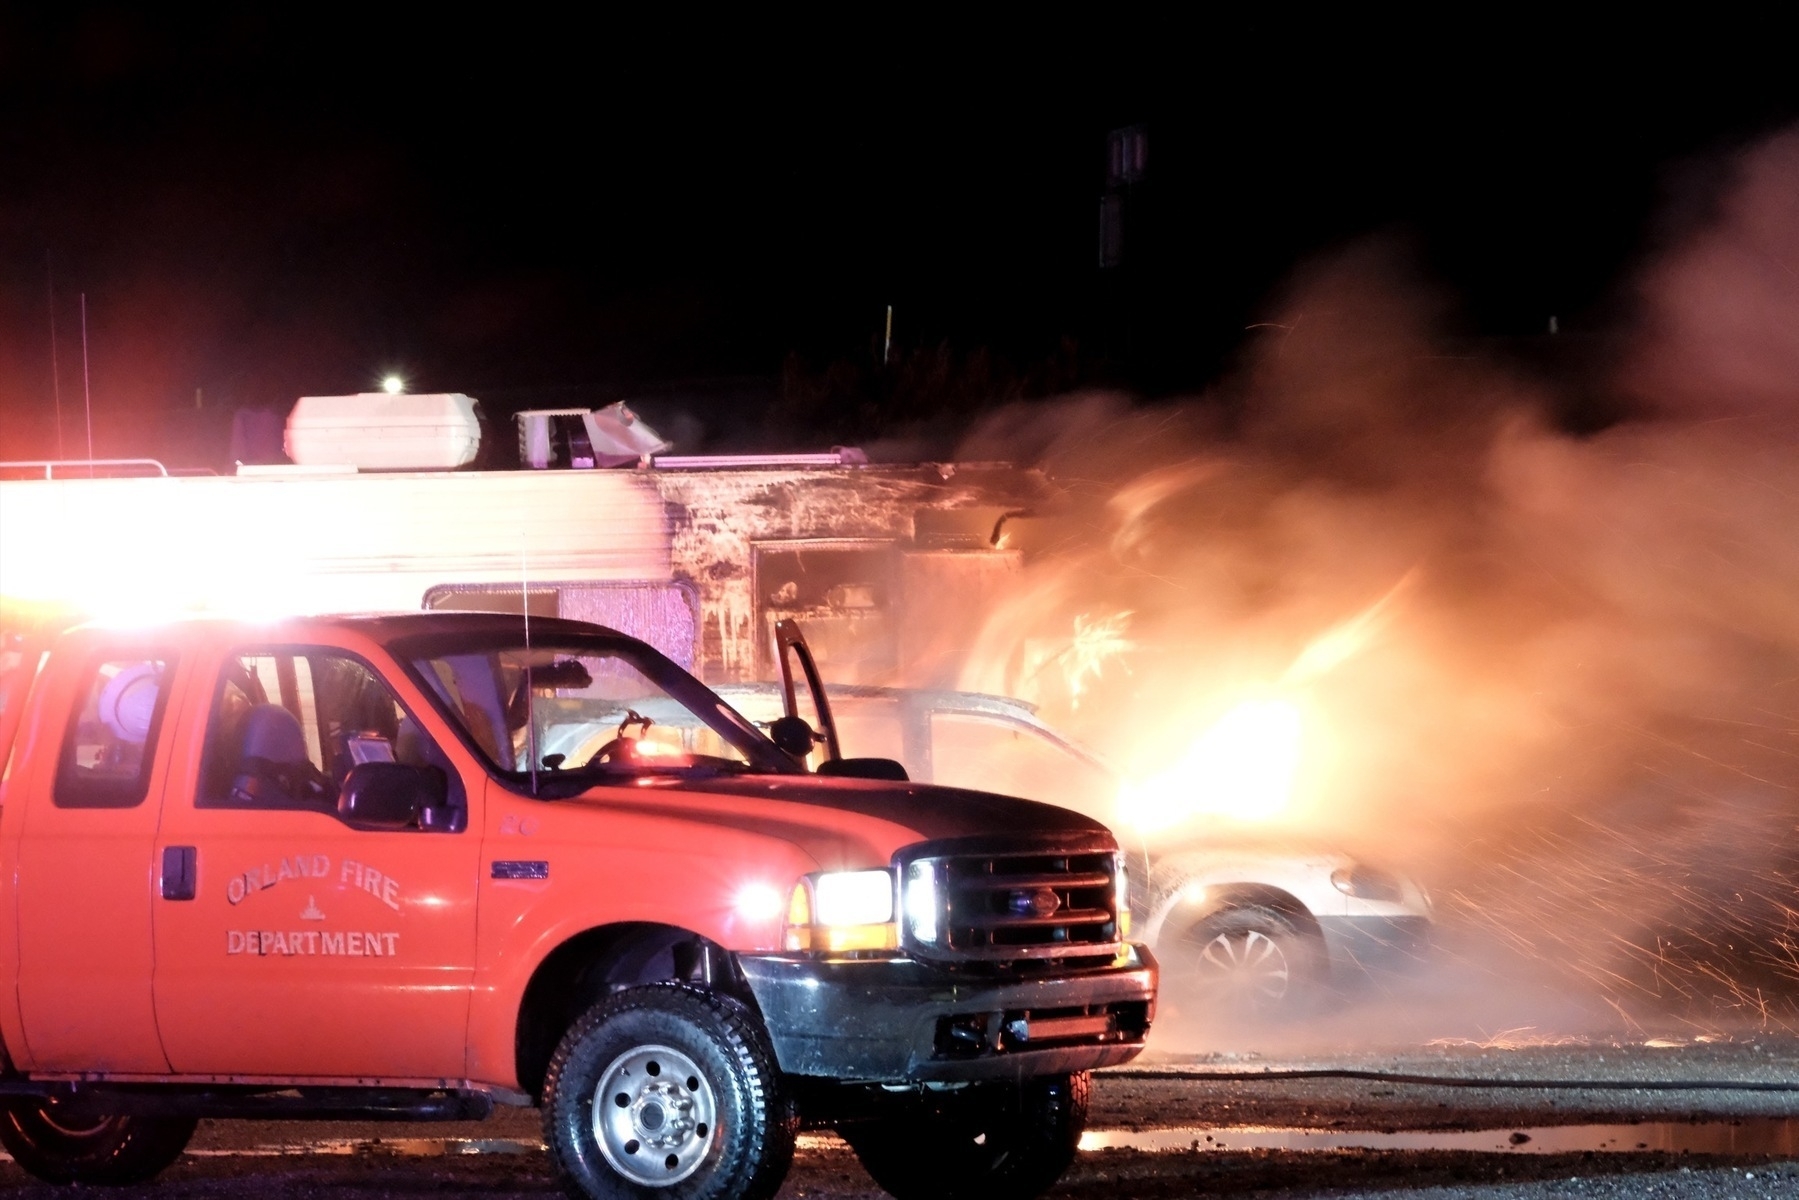 Night time photo of the front half of an RV on fire along with a car parked right next to it. Flames are roaring out th front of both vehicles. An Orland Fire Department truck sits in front of it all.